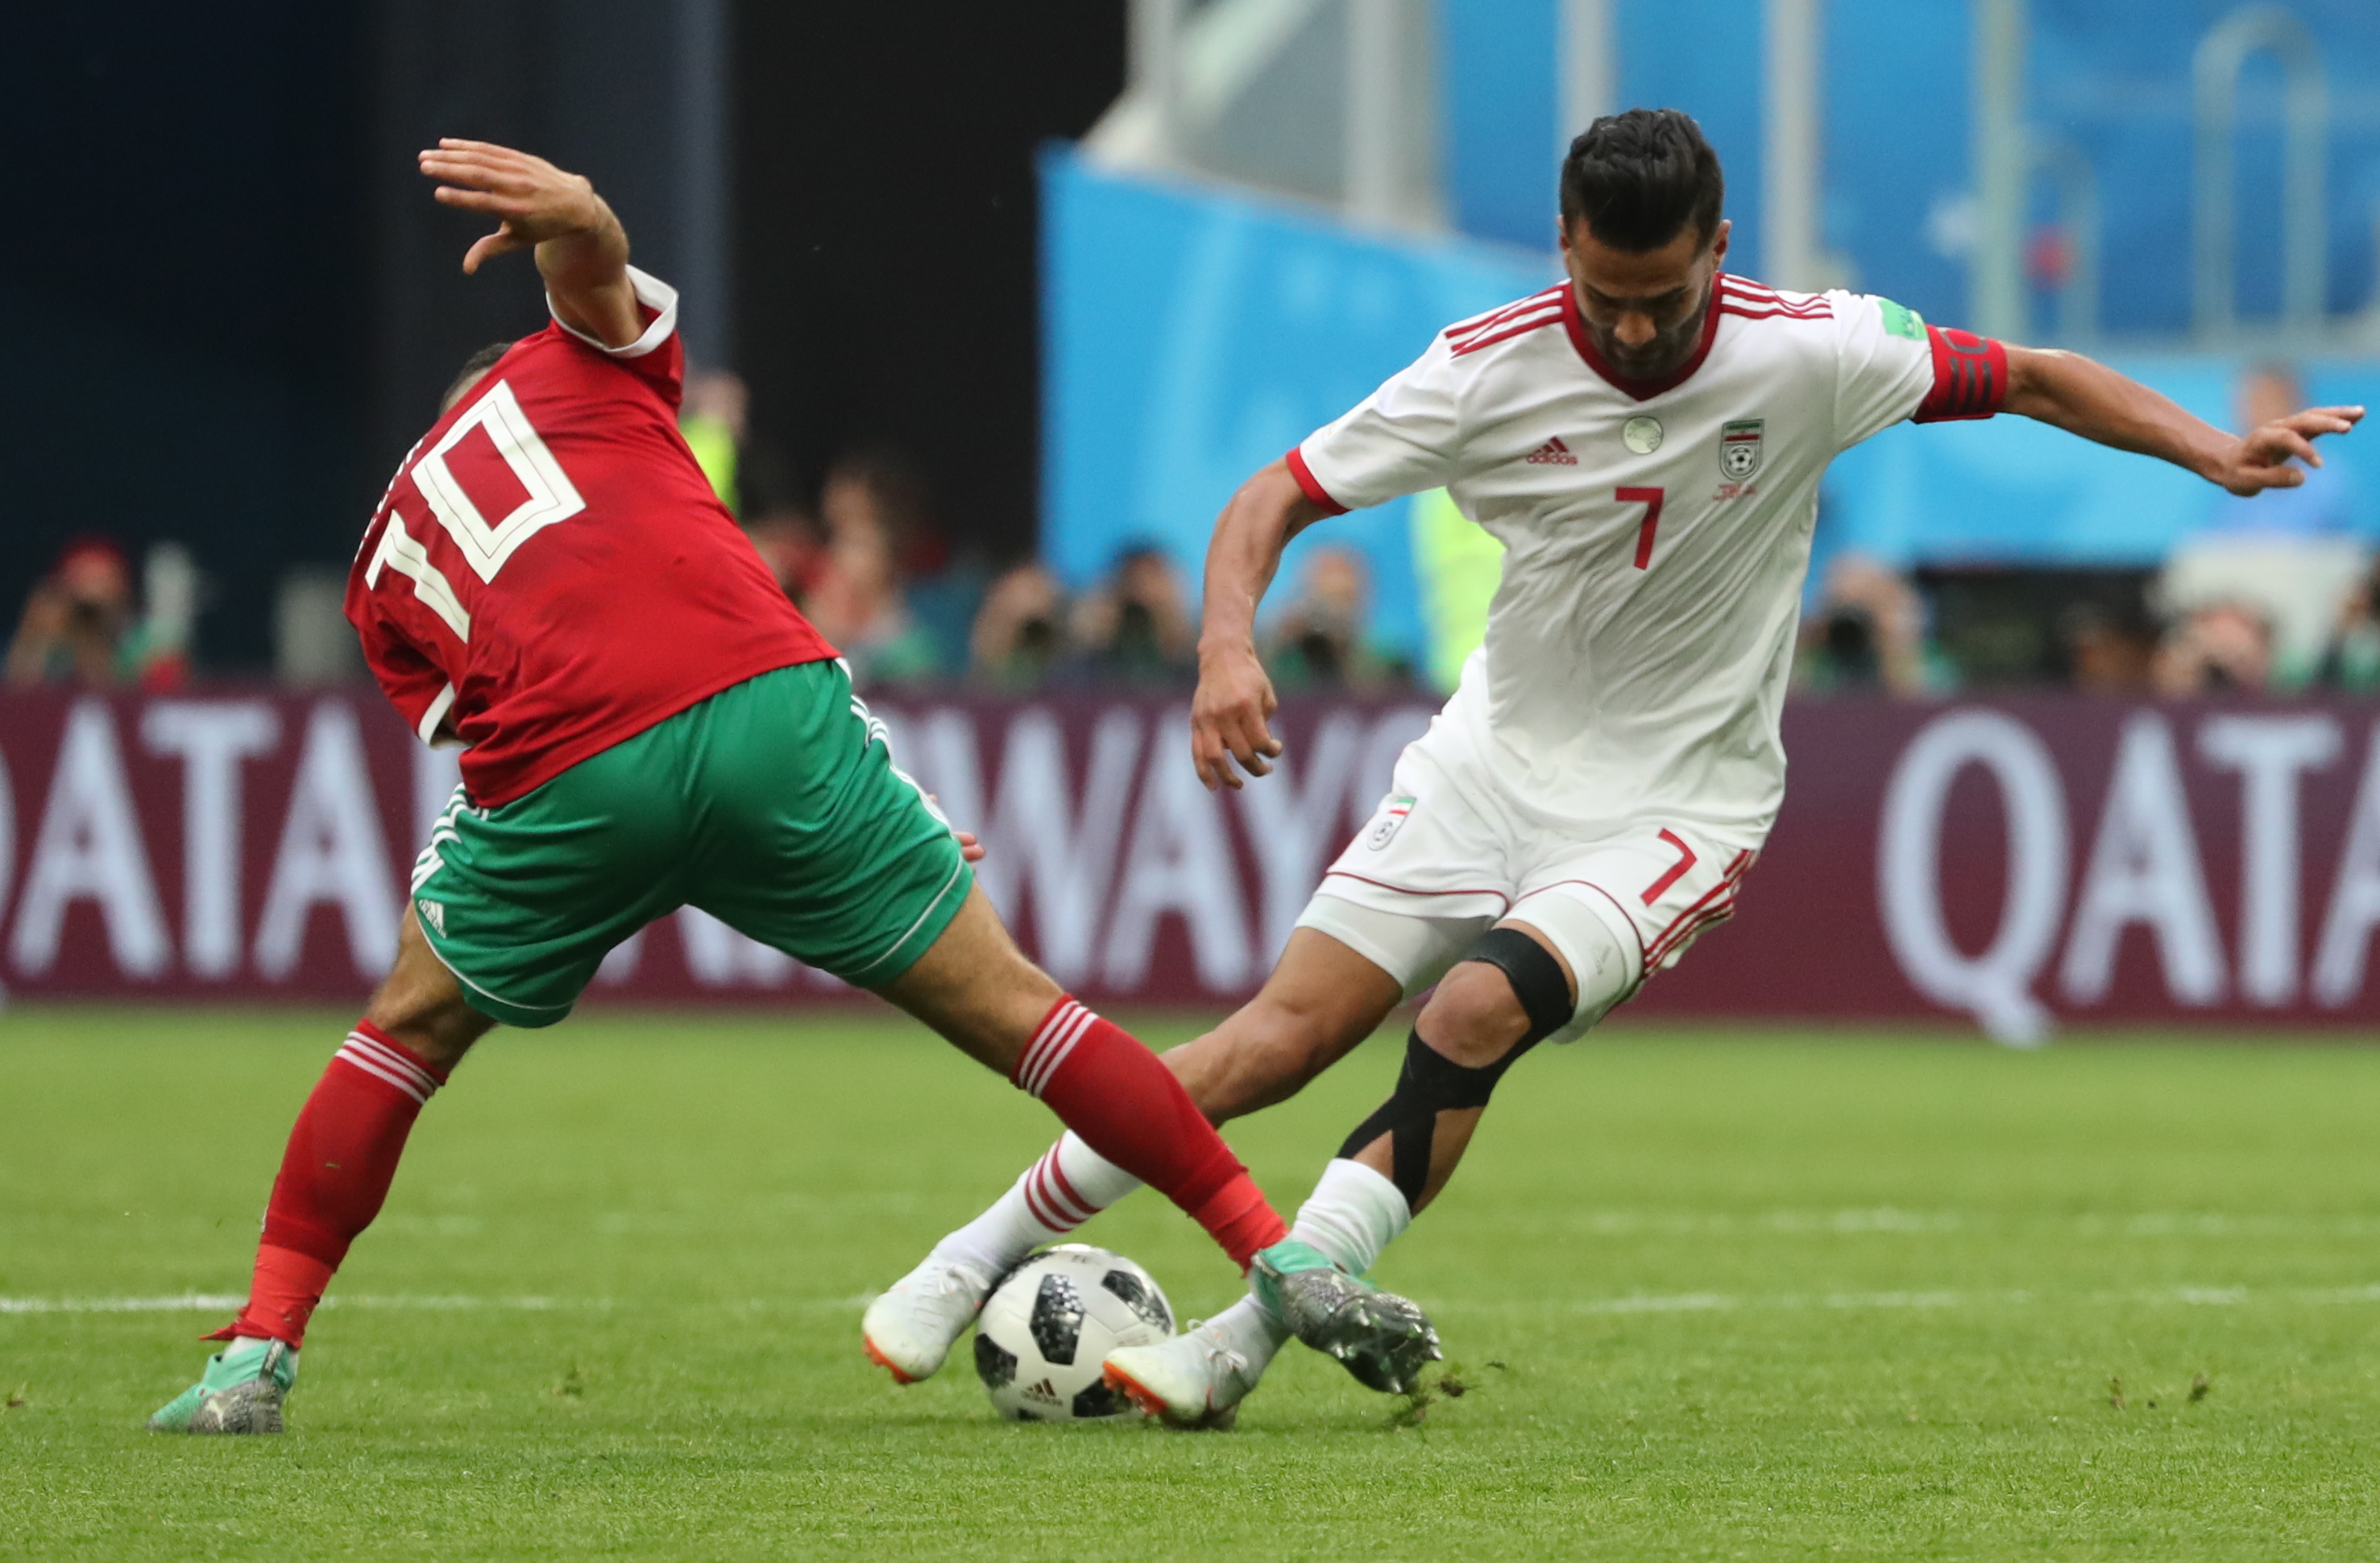 ST PETERSBURG, RUSSIA - JUNE 15, 2018: Morocco's Younes Belhanda (L) and Iran's Masoud Shojaei in a First Stage Group B football match between Morocco and Iran at Saint-Petersburg Stadium (also known as Krestovsky Stadium) at FIFA World Cup Russia 2018 (Alexander Demianchuk—Alexander Demianchuk/TASS)